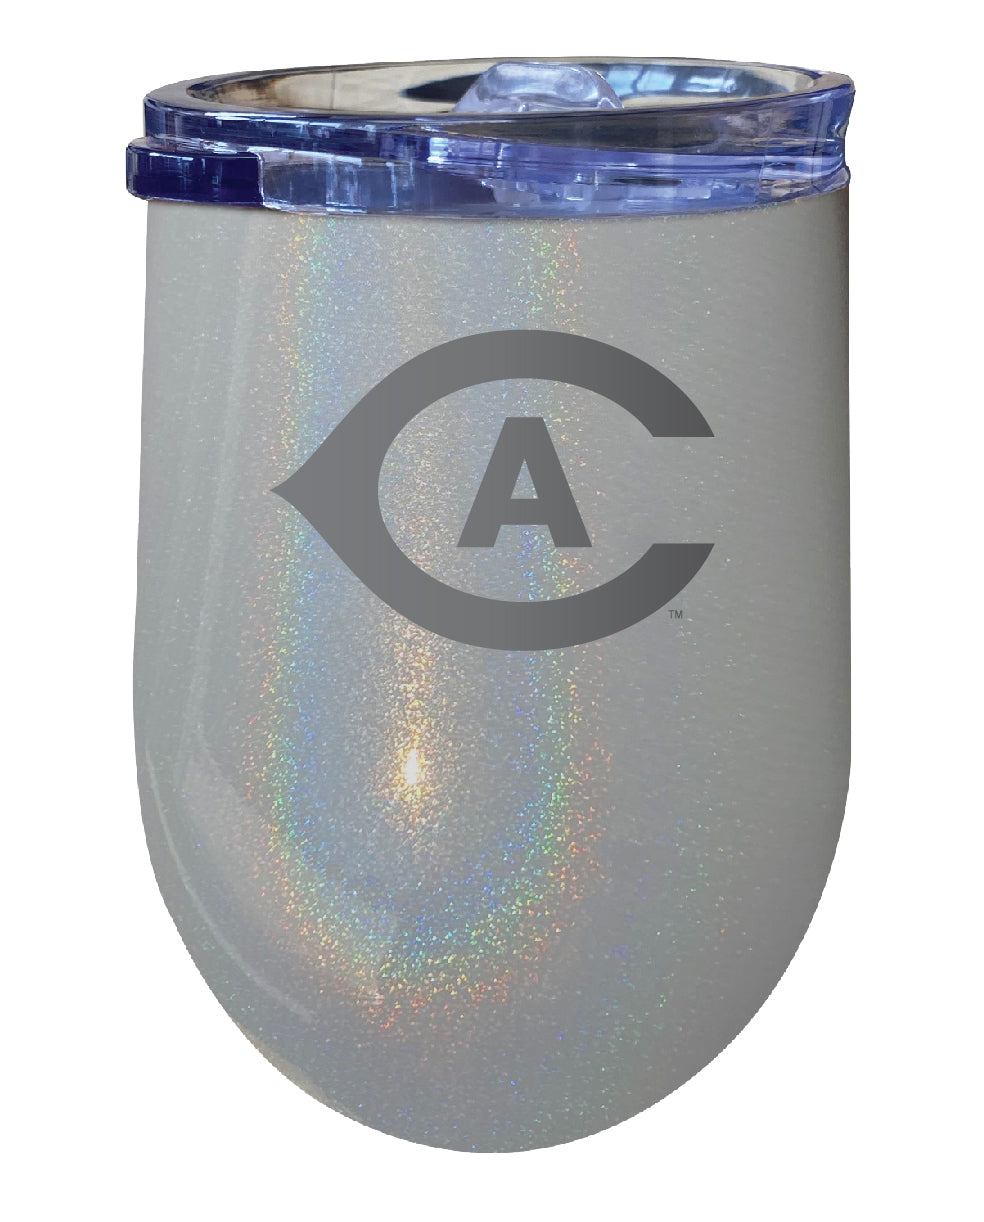 UC Davis Aggies 12 oz Laser Etched Insulated Wine Stainless Steel Tumbler Rainbow Glitter Grey